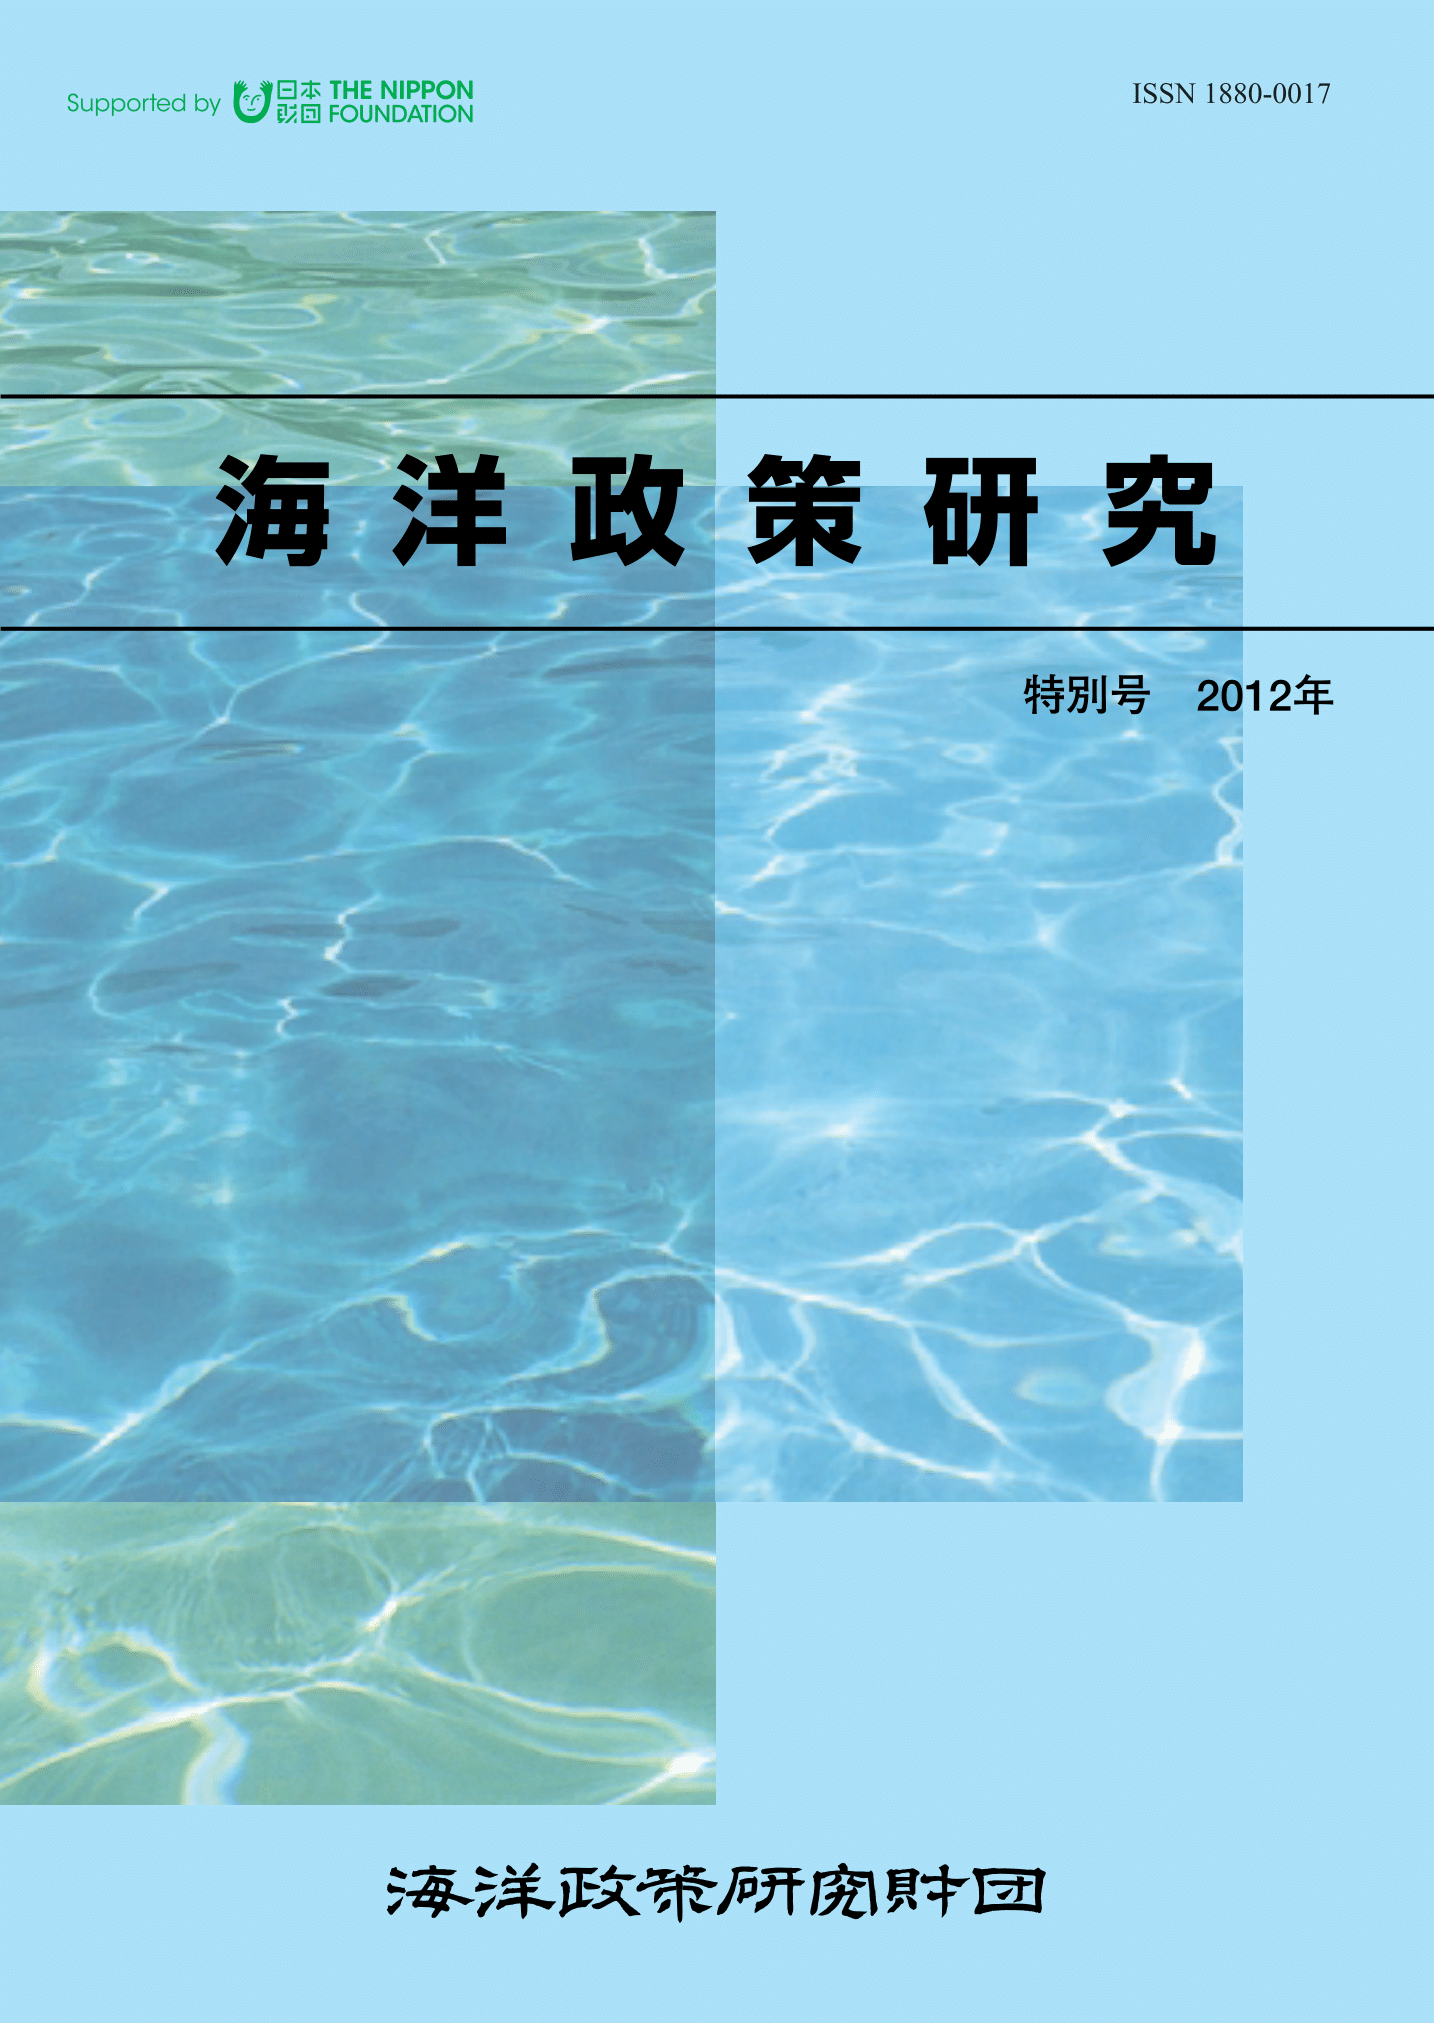 Ocean Policy Studies Special Edition (Japanese Only) cover